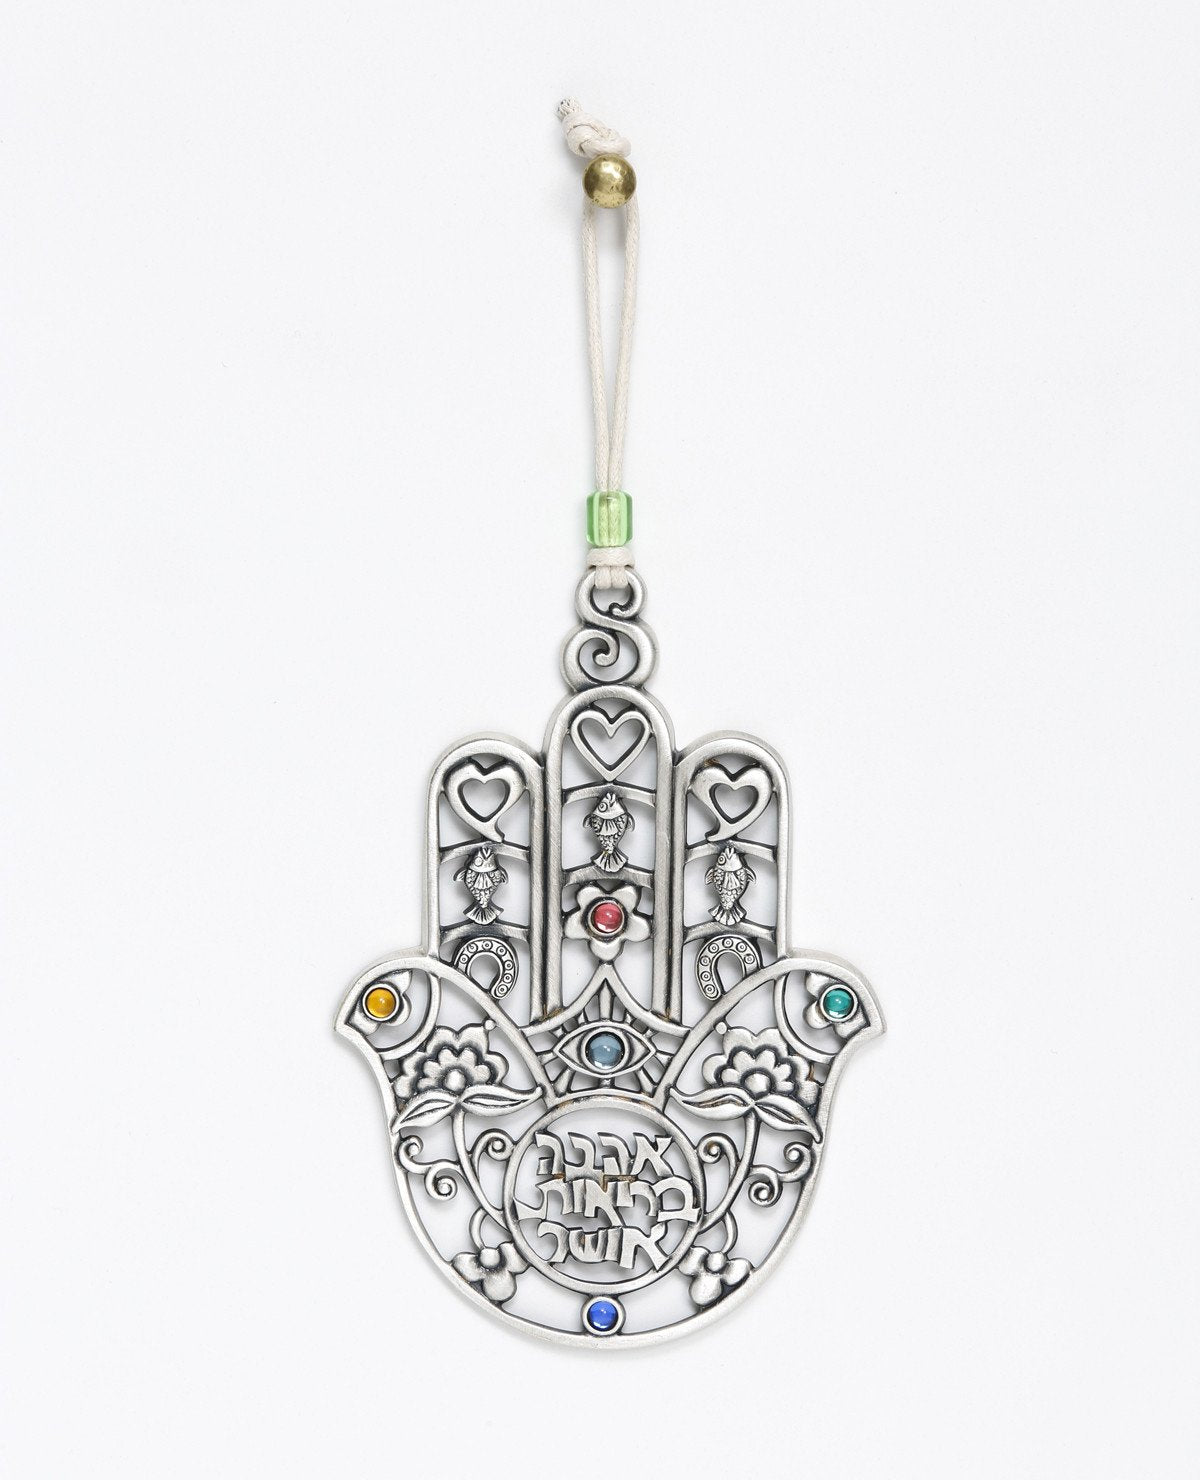 A Hamsa hanging wall ornament, gently designed and full of presence. The more you look at it the more and more you discover details and motifs that intensify its beauty. You can find motifs of a heart, a horseshoe, and a fish... Can you spot the birds? The special cut which creates a variety of different shapes, the intertwined flowers, the coloful stones... in short, a medley of designs and blessings in words and symbols. A gift you will want to gaze at more and more and give again and again. The ornament 